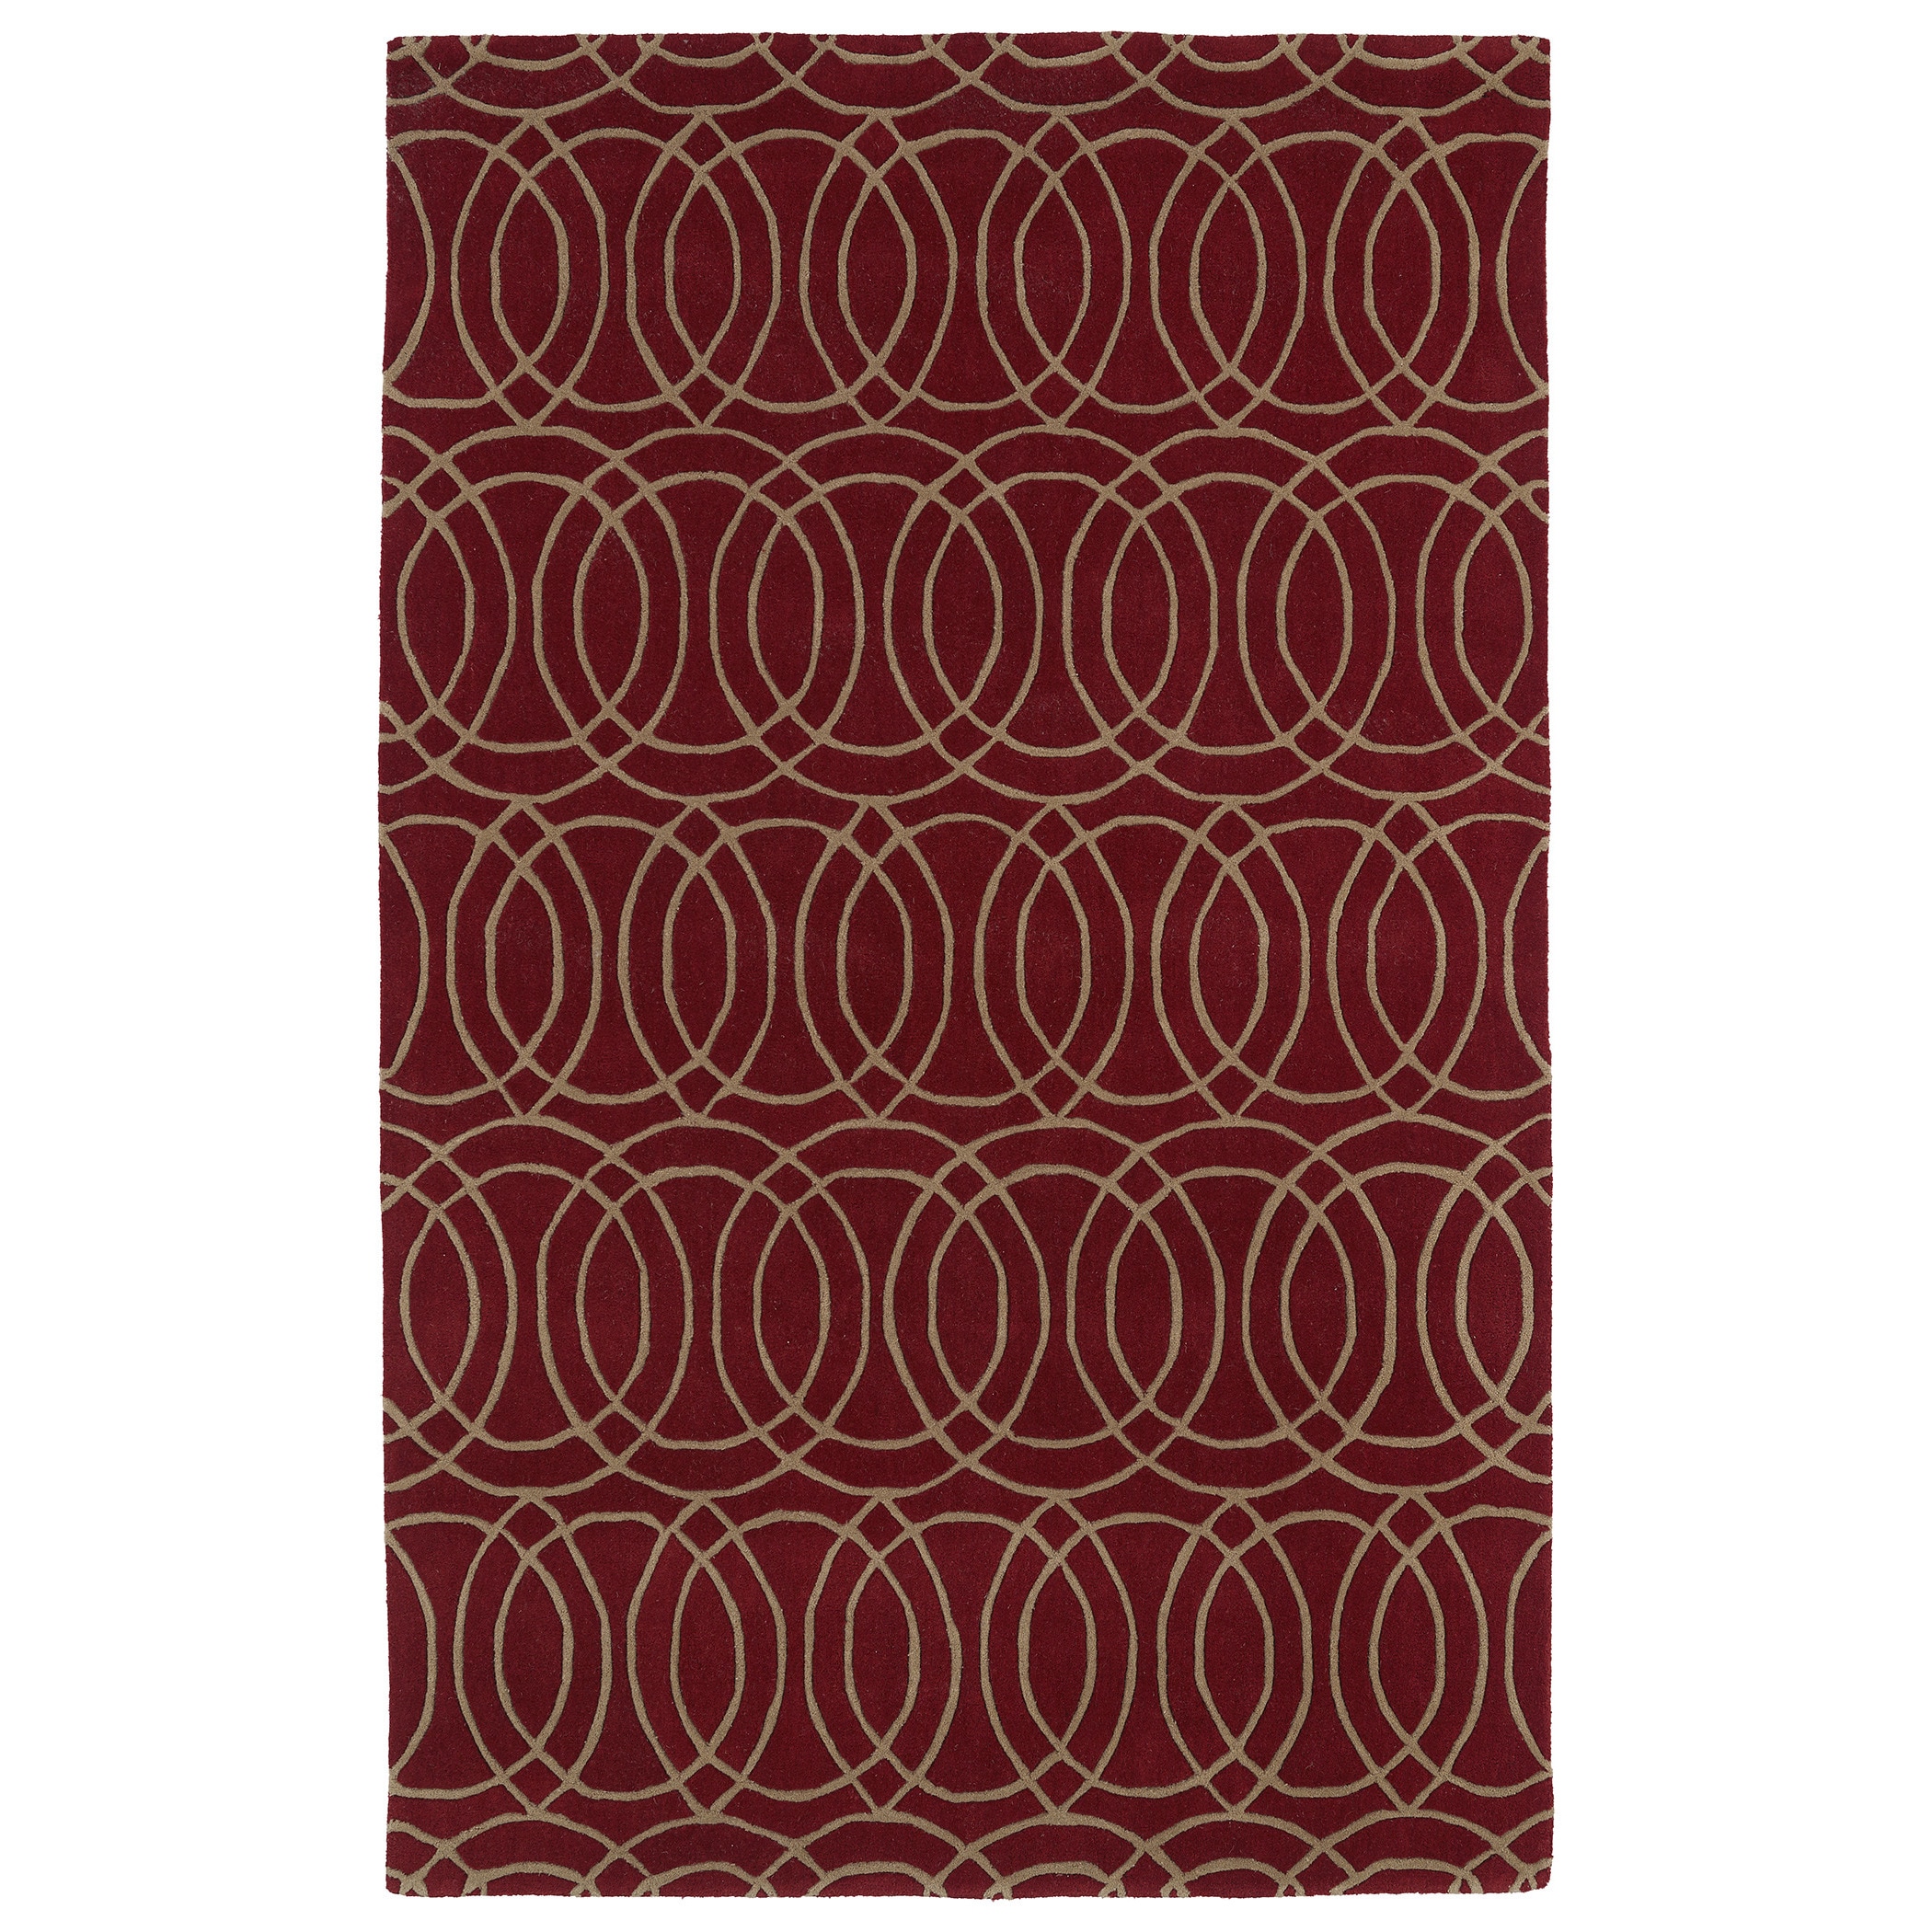 Hand tufted Cosmopolitan Circles Red/ Camel Wool Rug (5 X 79)